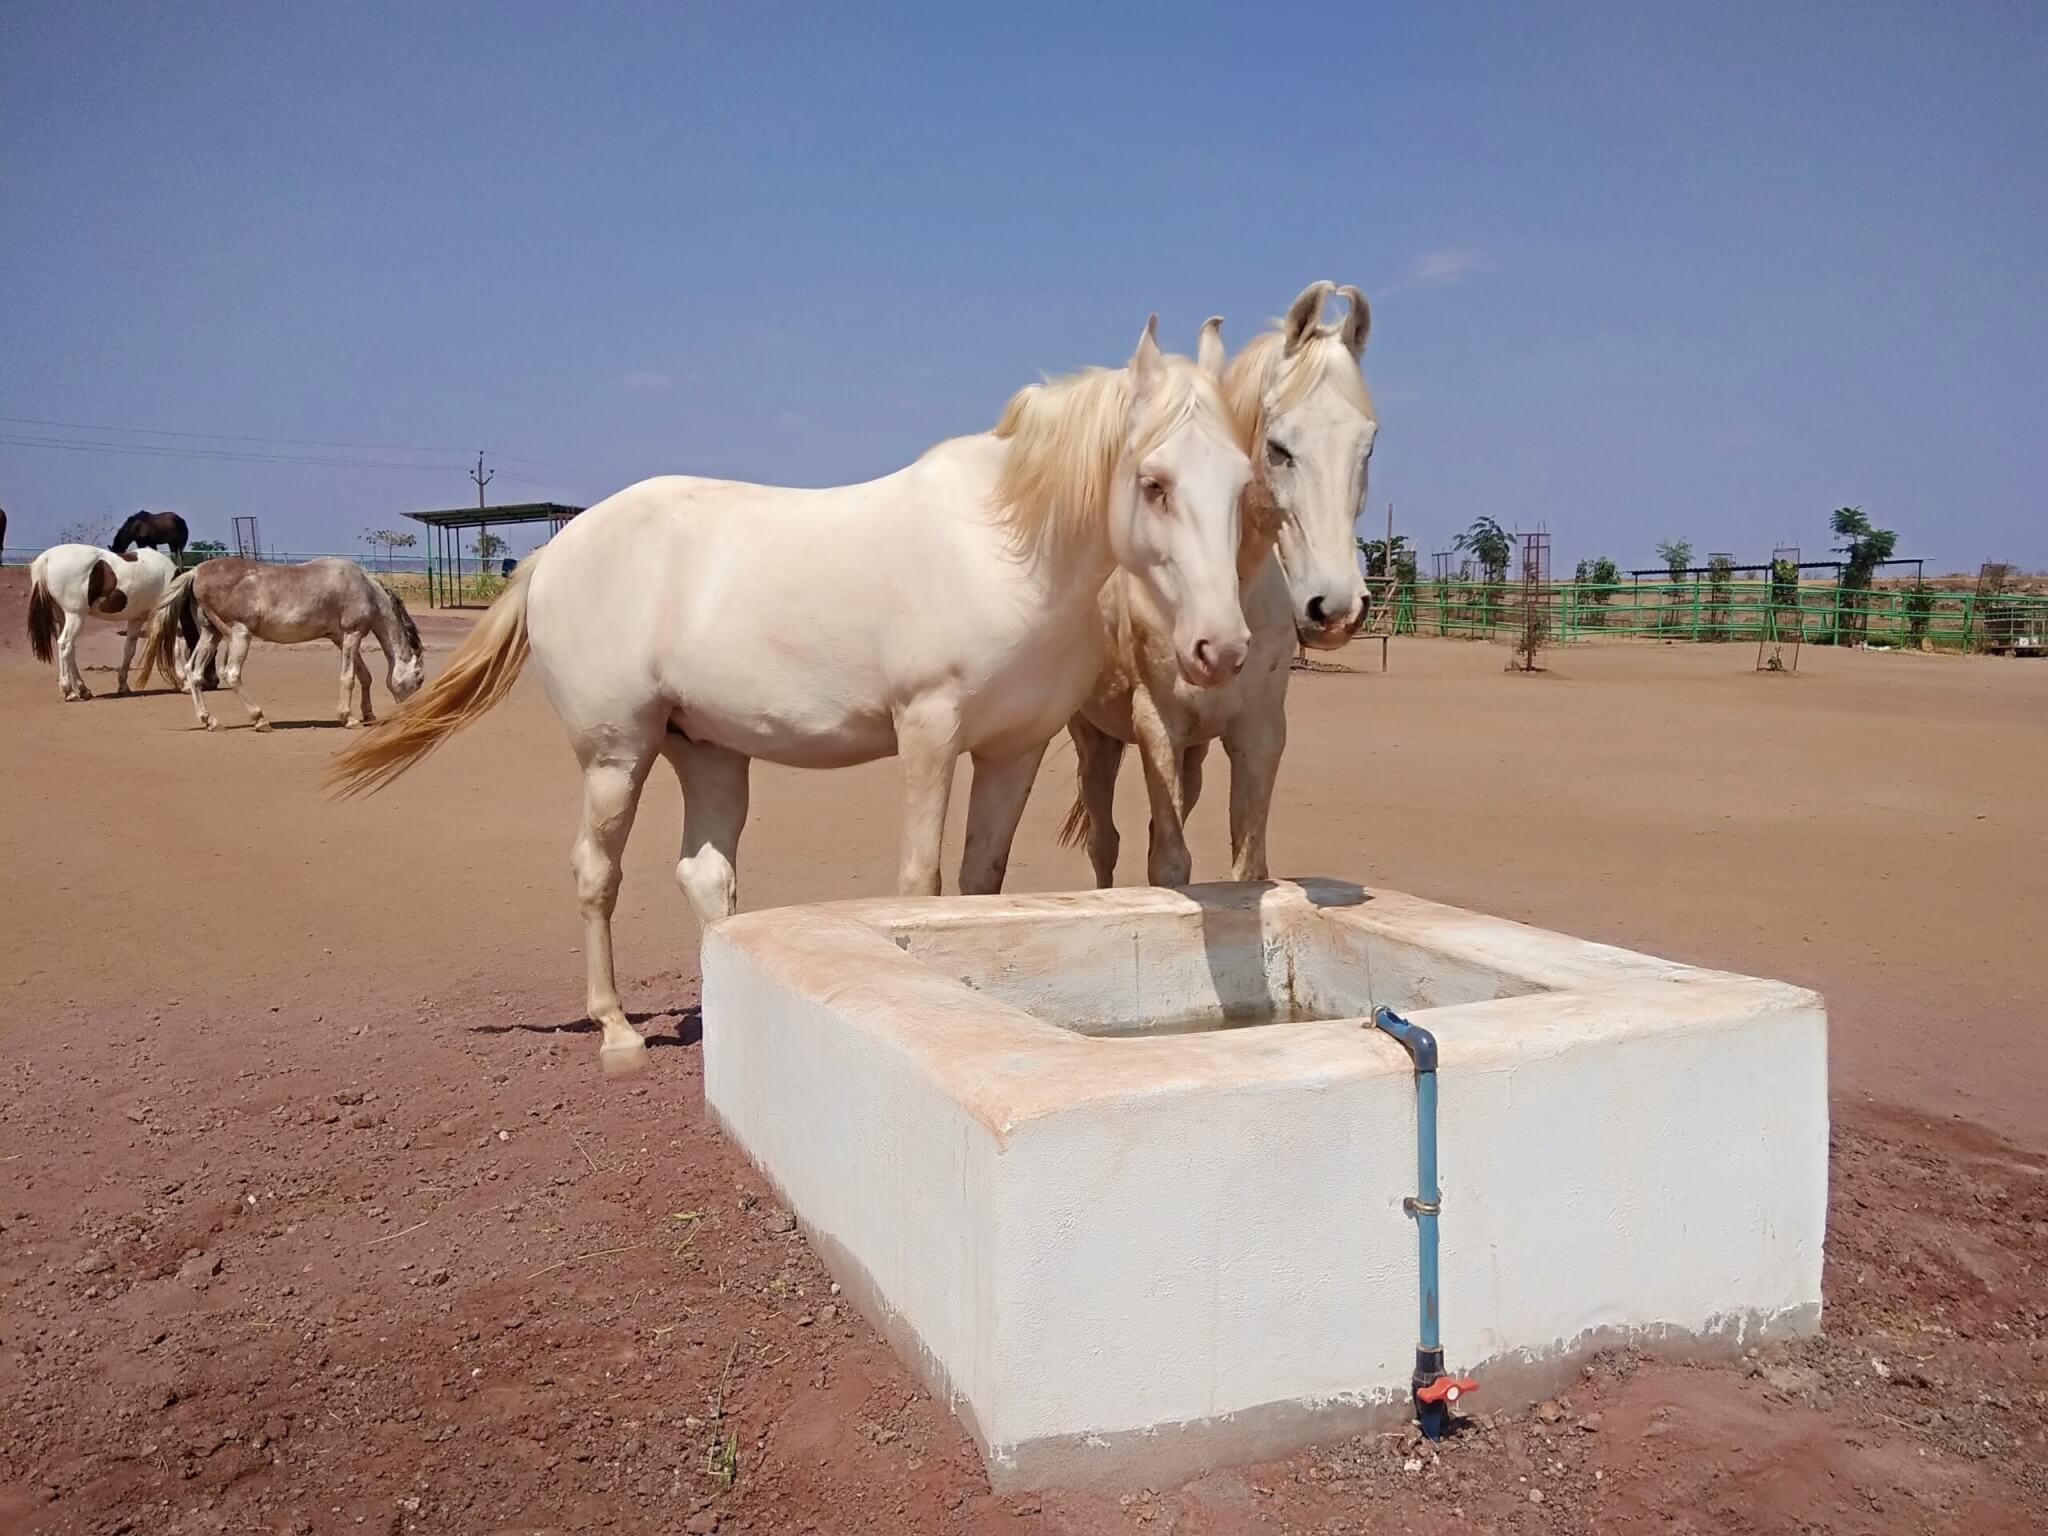 Rescued horses are ready to drink from a freshly cleaned water trough.